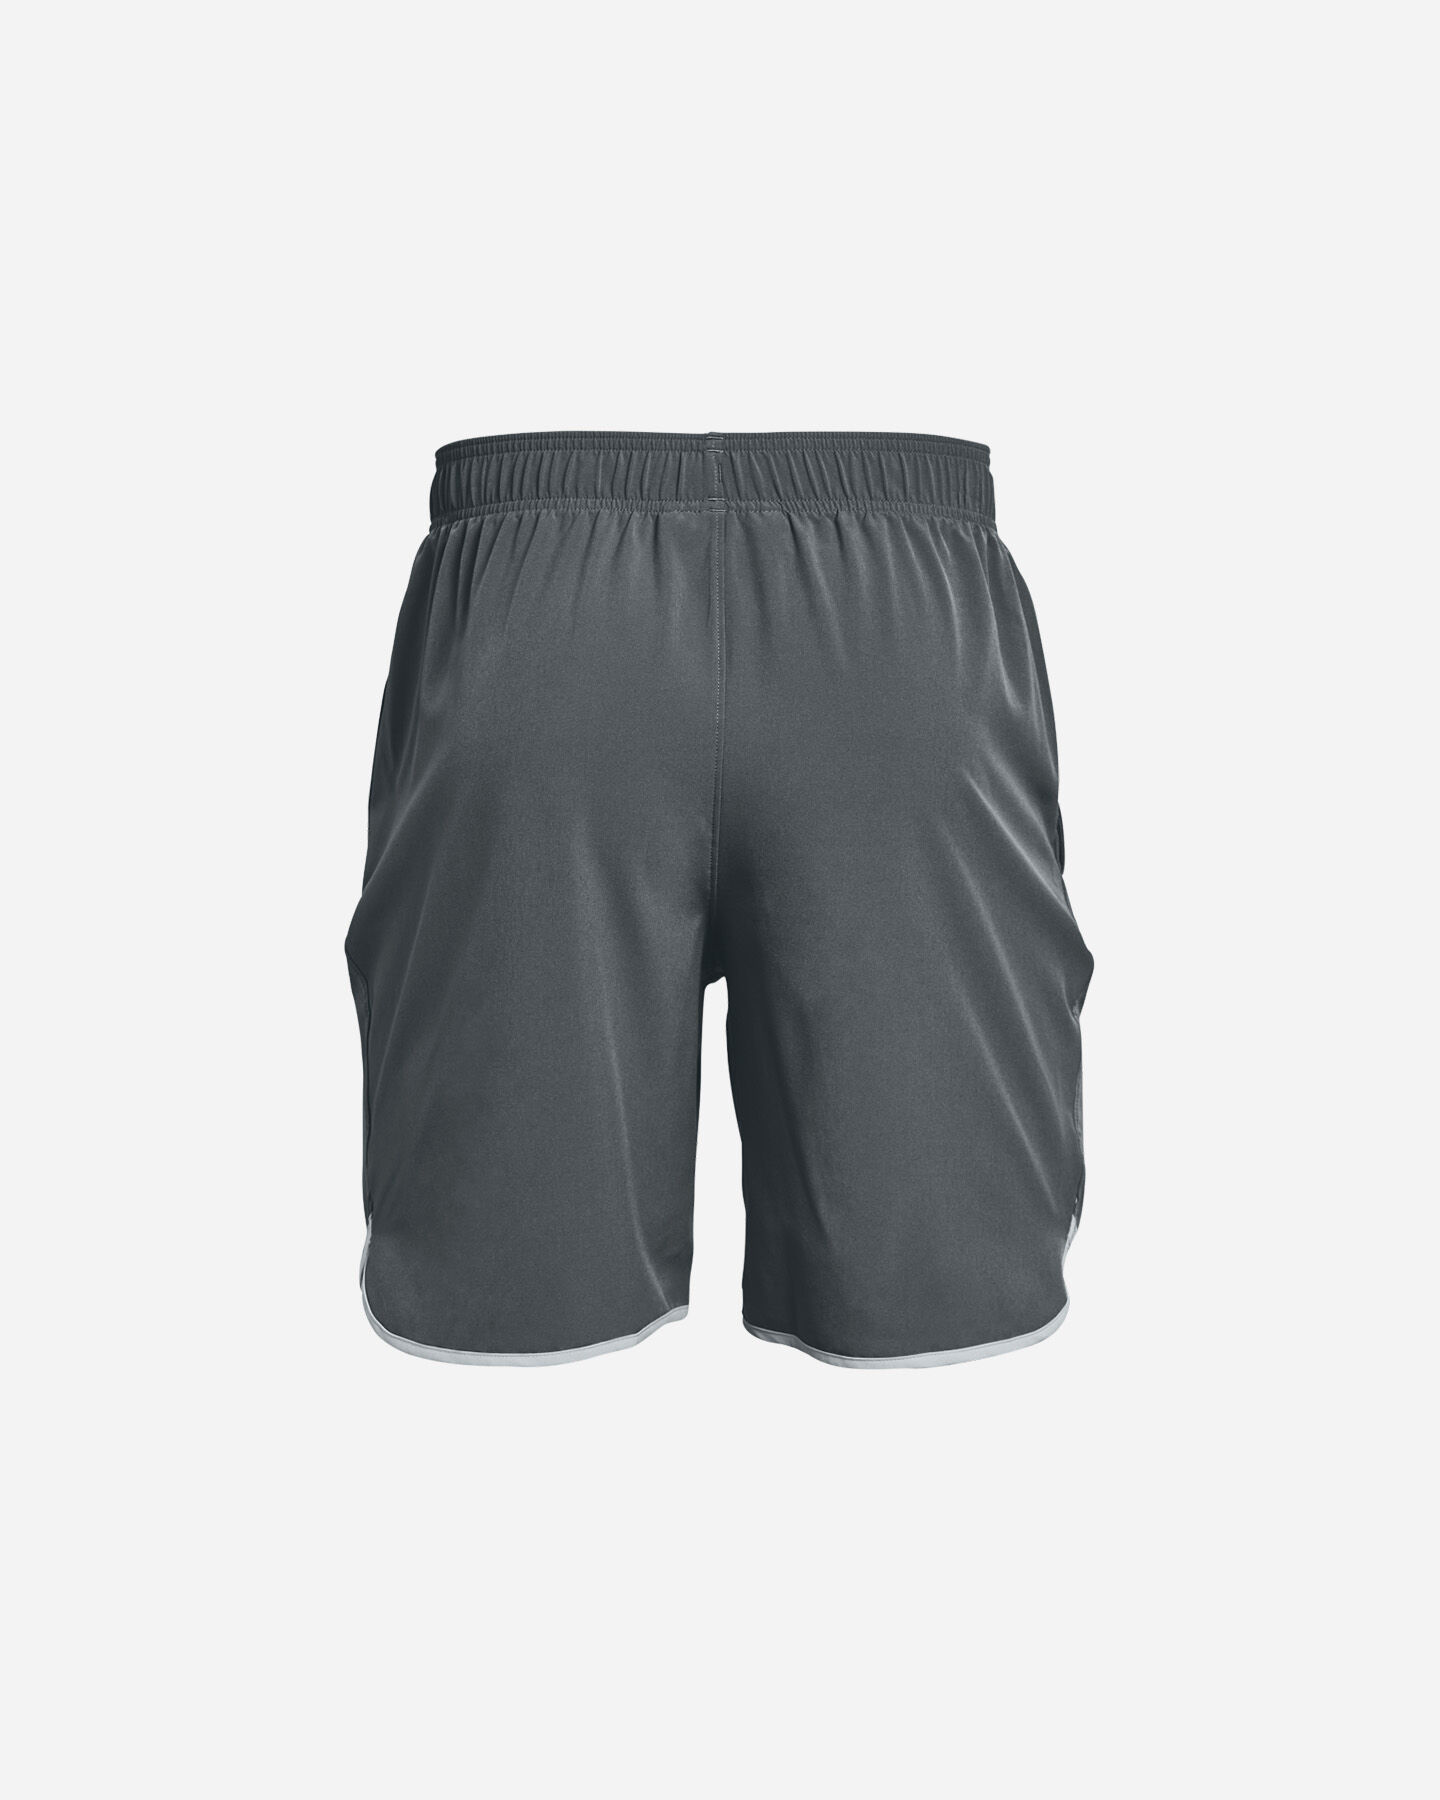  Pantalone training UNDER ARMOUR HIIT WOVEN M S5287183|0012|SM scatto 1